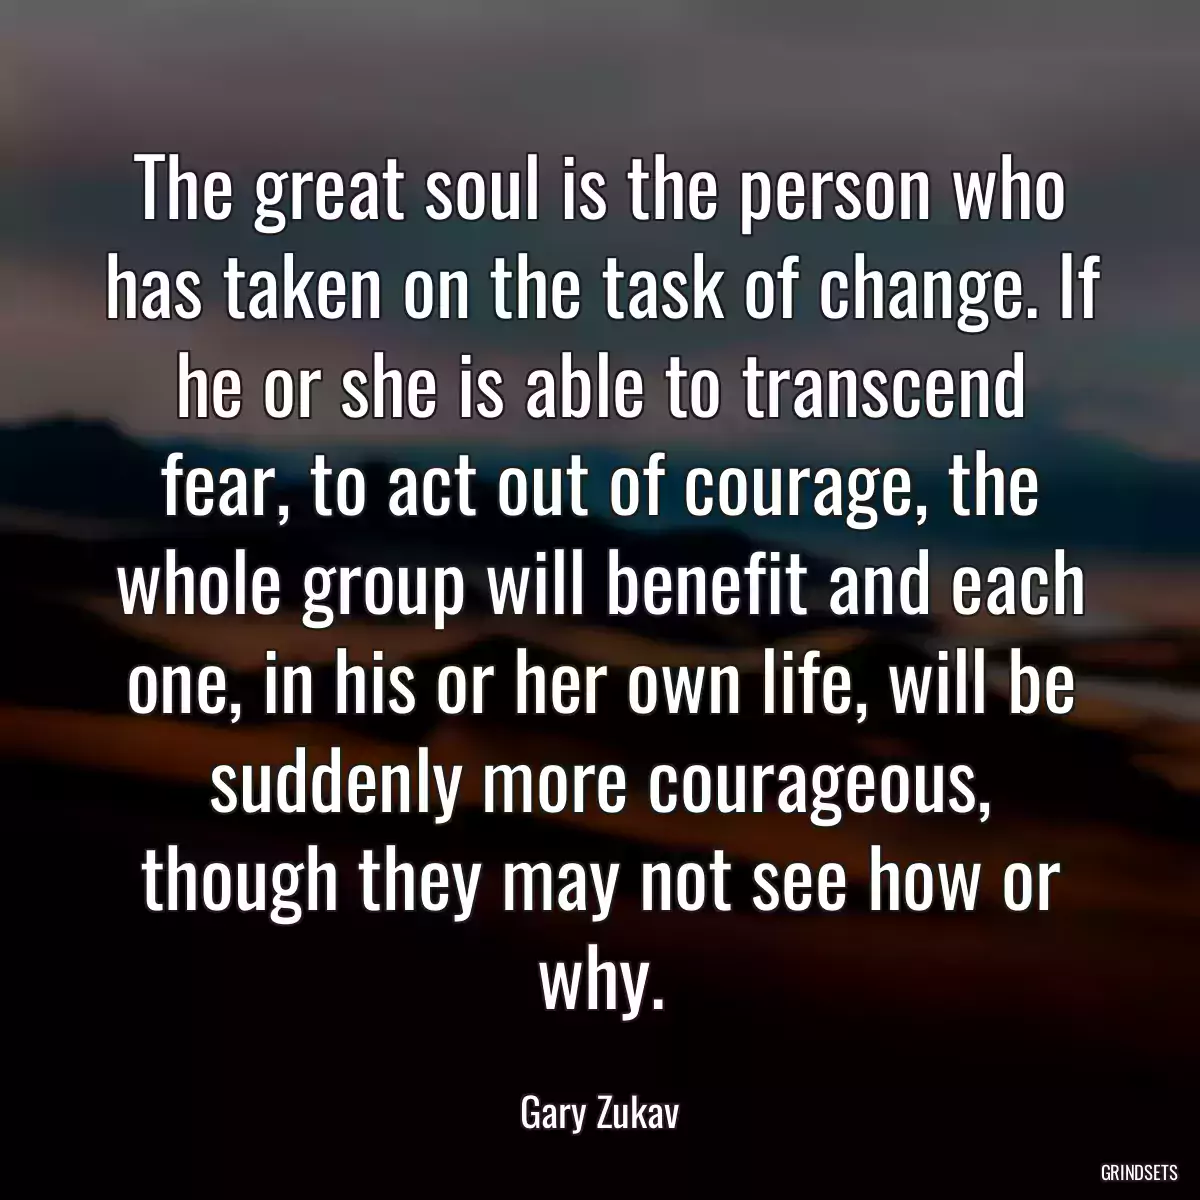 The great soul is the person who has taken on the task of change. If he or she is able to transcend fear, to act out of courage, the whole group will benefit and each one, in his or her own life, will be suddenly more courageous, though they may not see how or why.